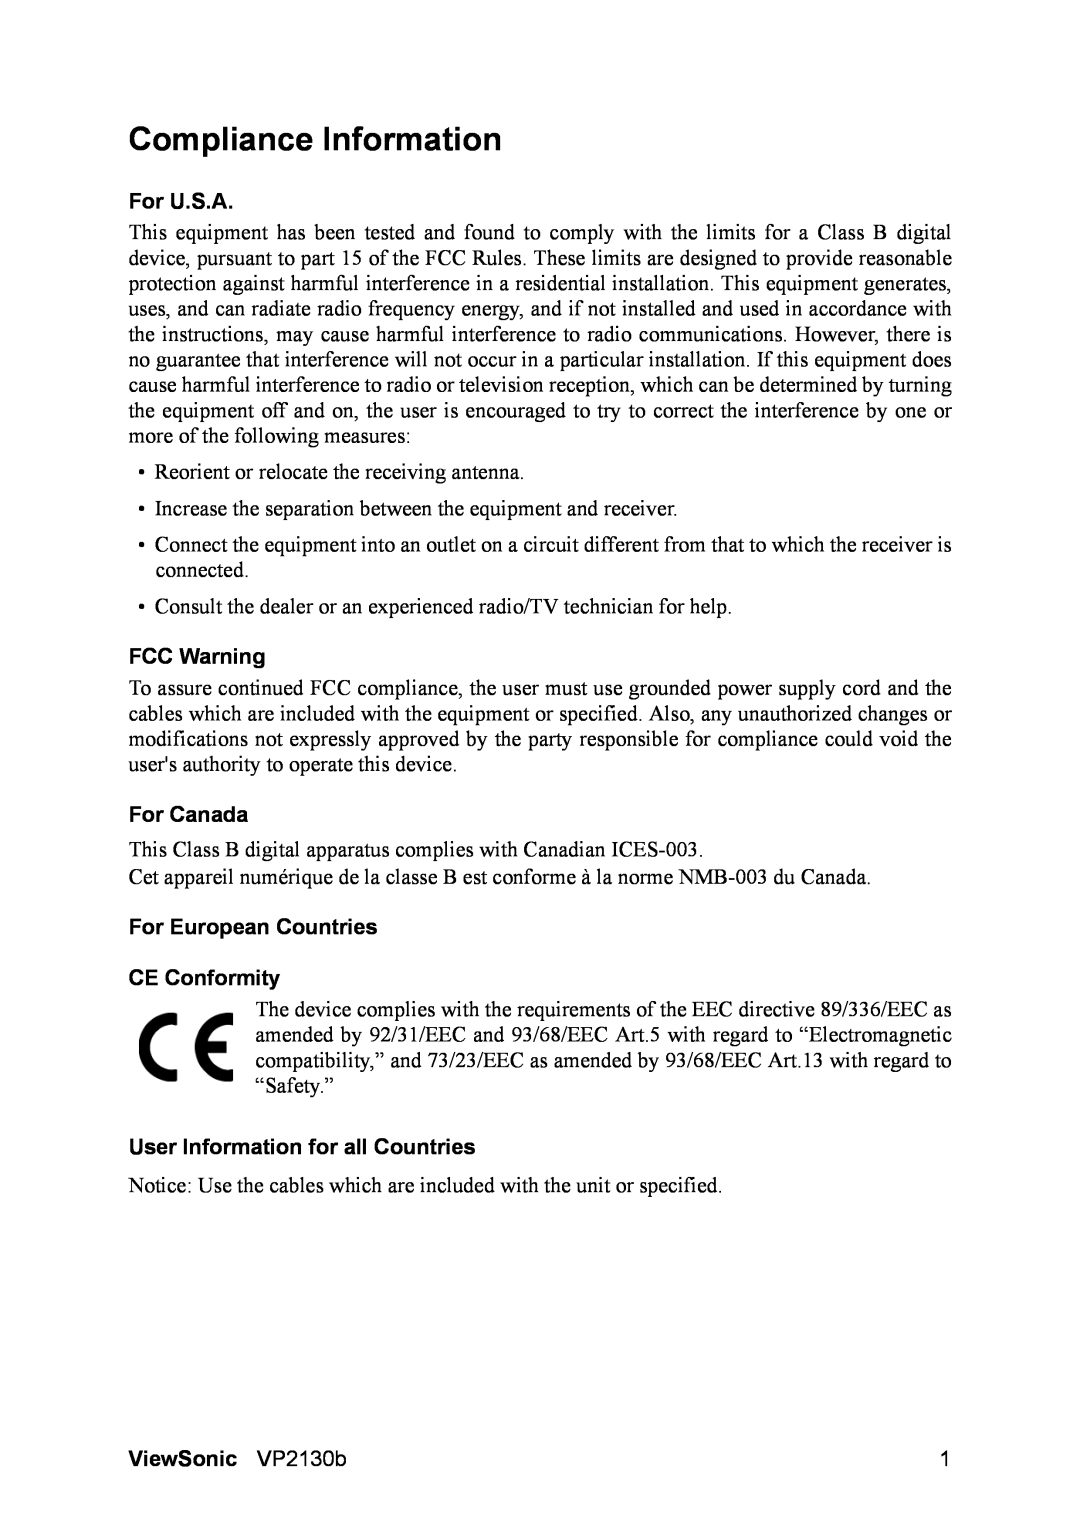 ViewSonic VP2130B manual Compliance Information, For U.S.A, FCC Warning, For Canada, For European Countries CE Conformity 